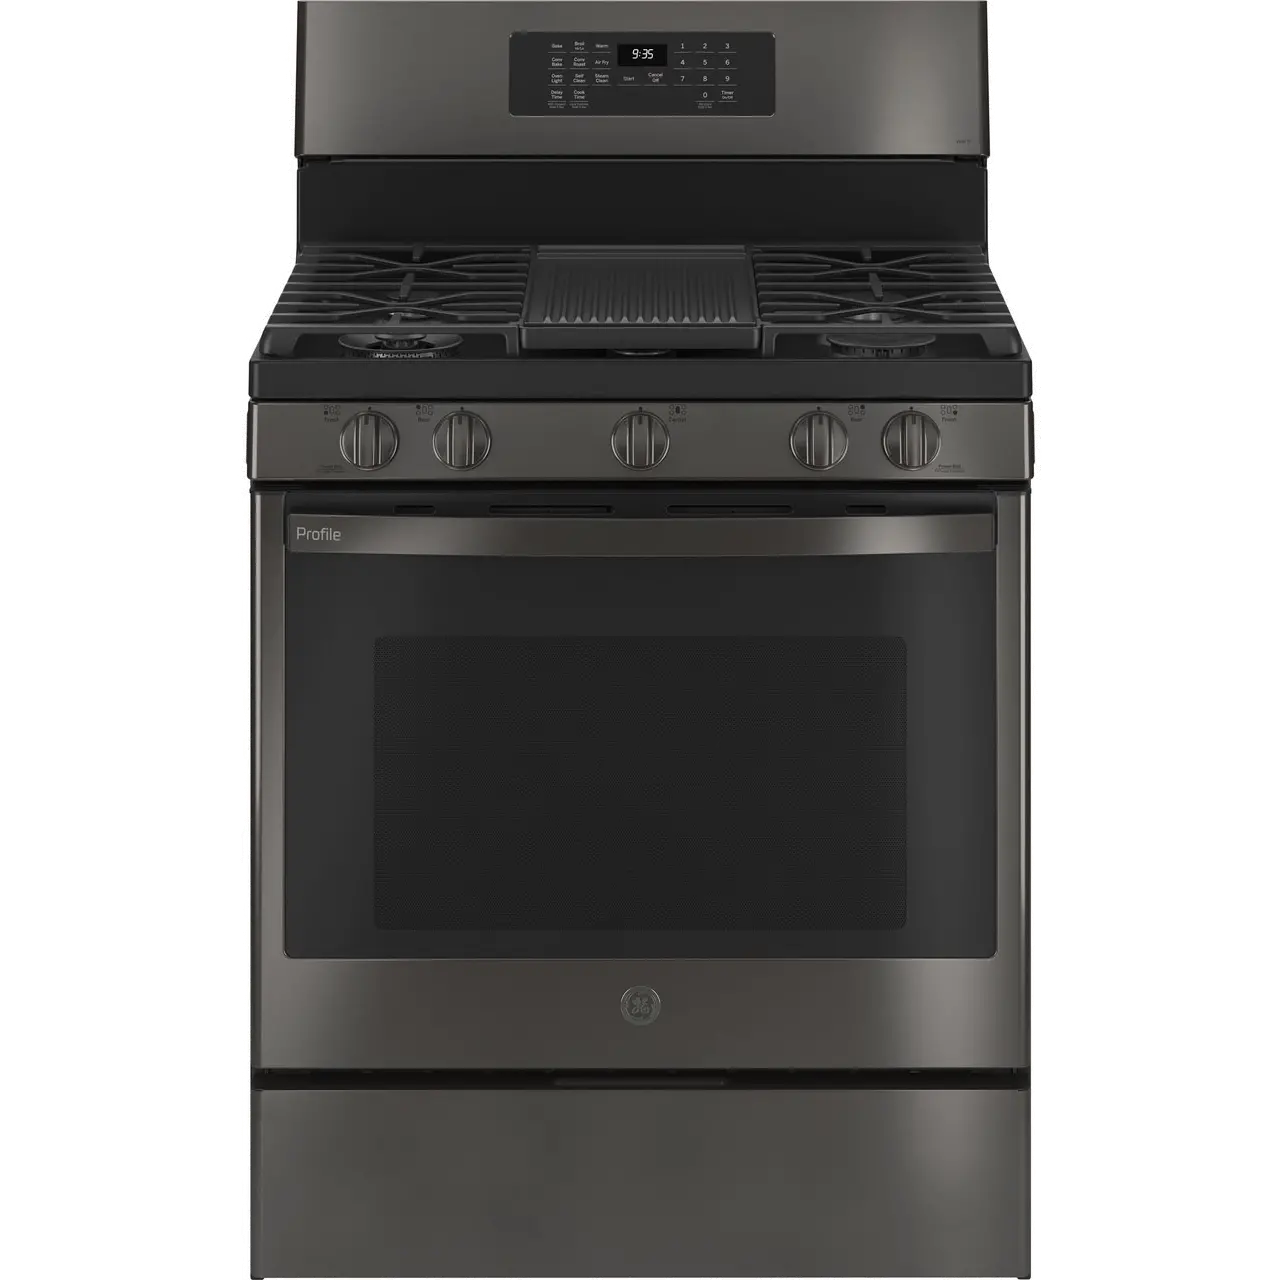 PGB935BPTS GE Profile 30 Inch Smart Gas Range with Convection - 5.3 cu. ft. Black Stainless Steel-1